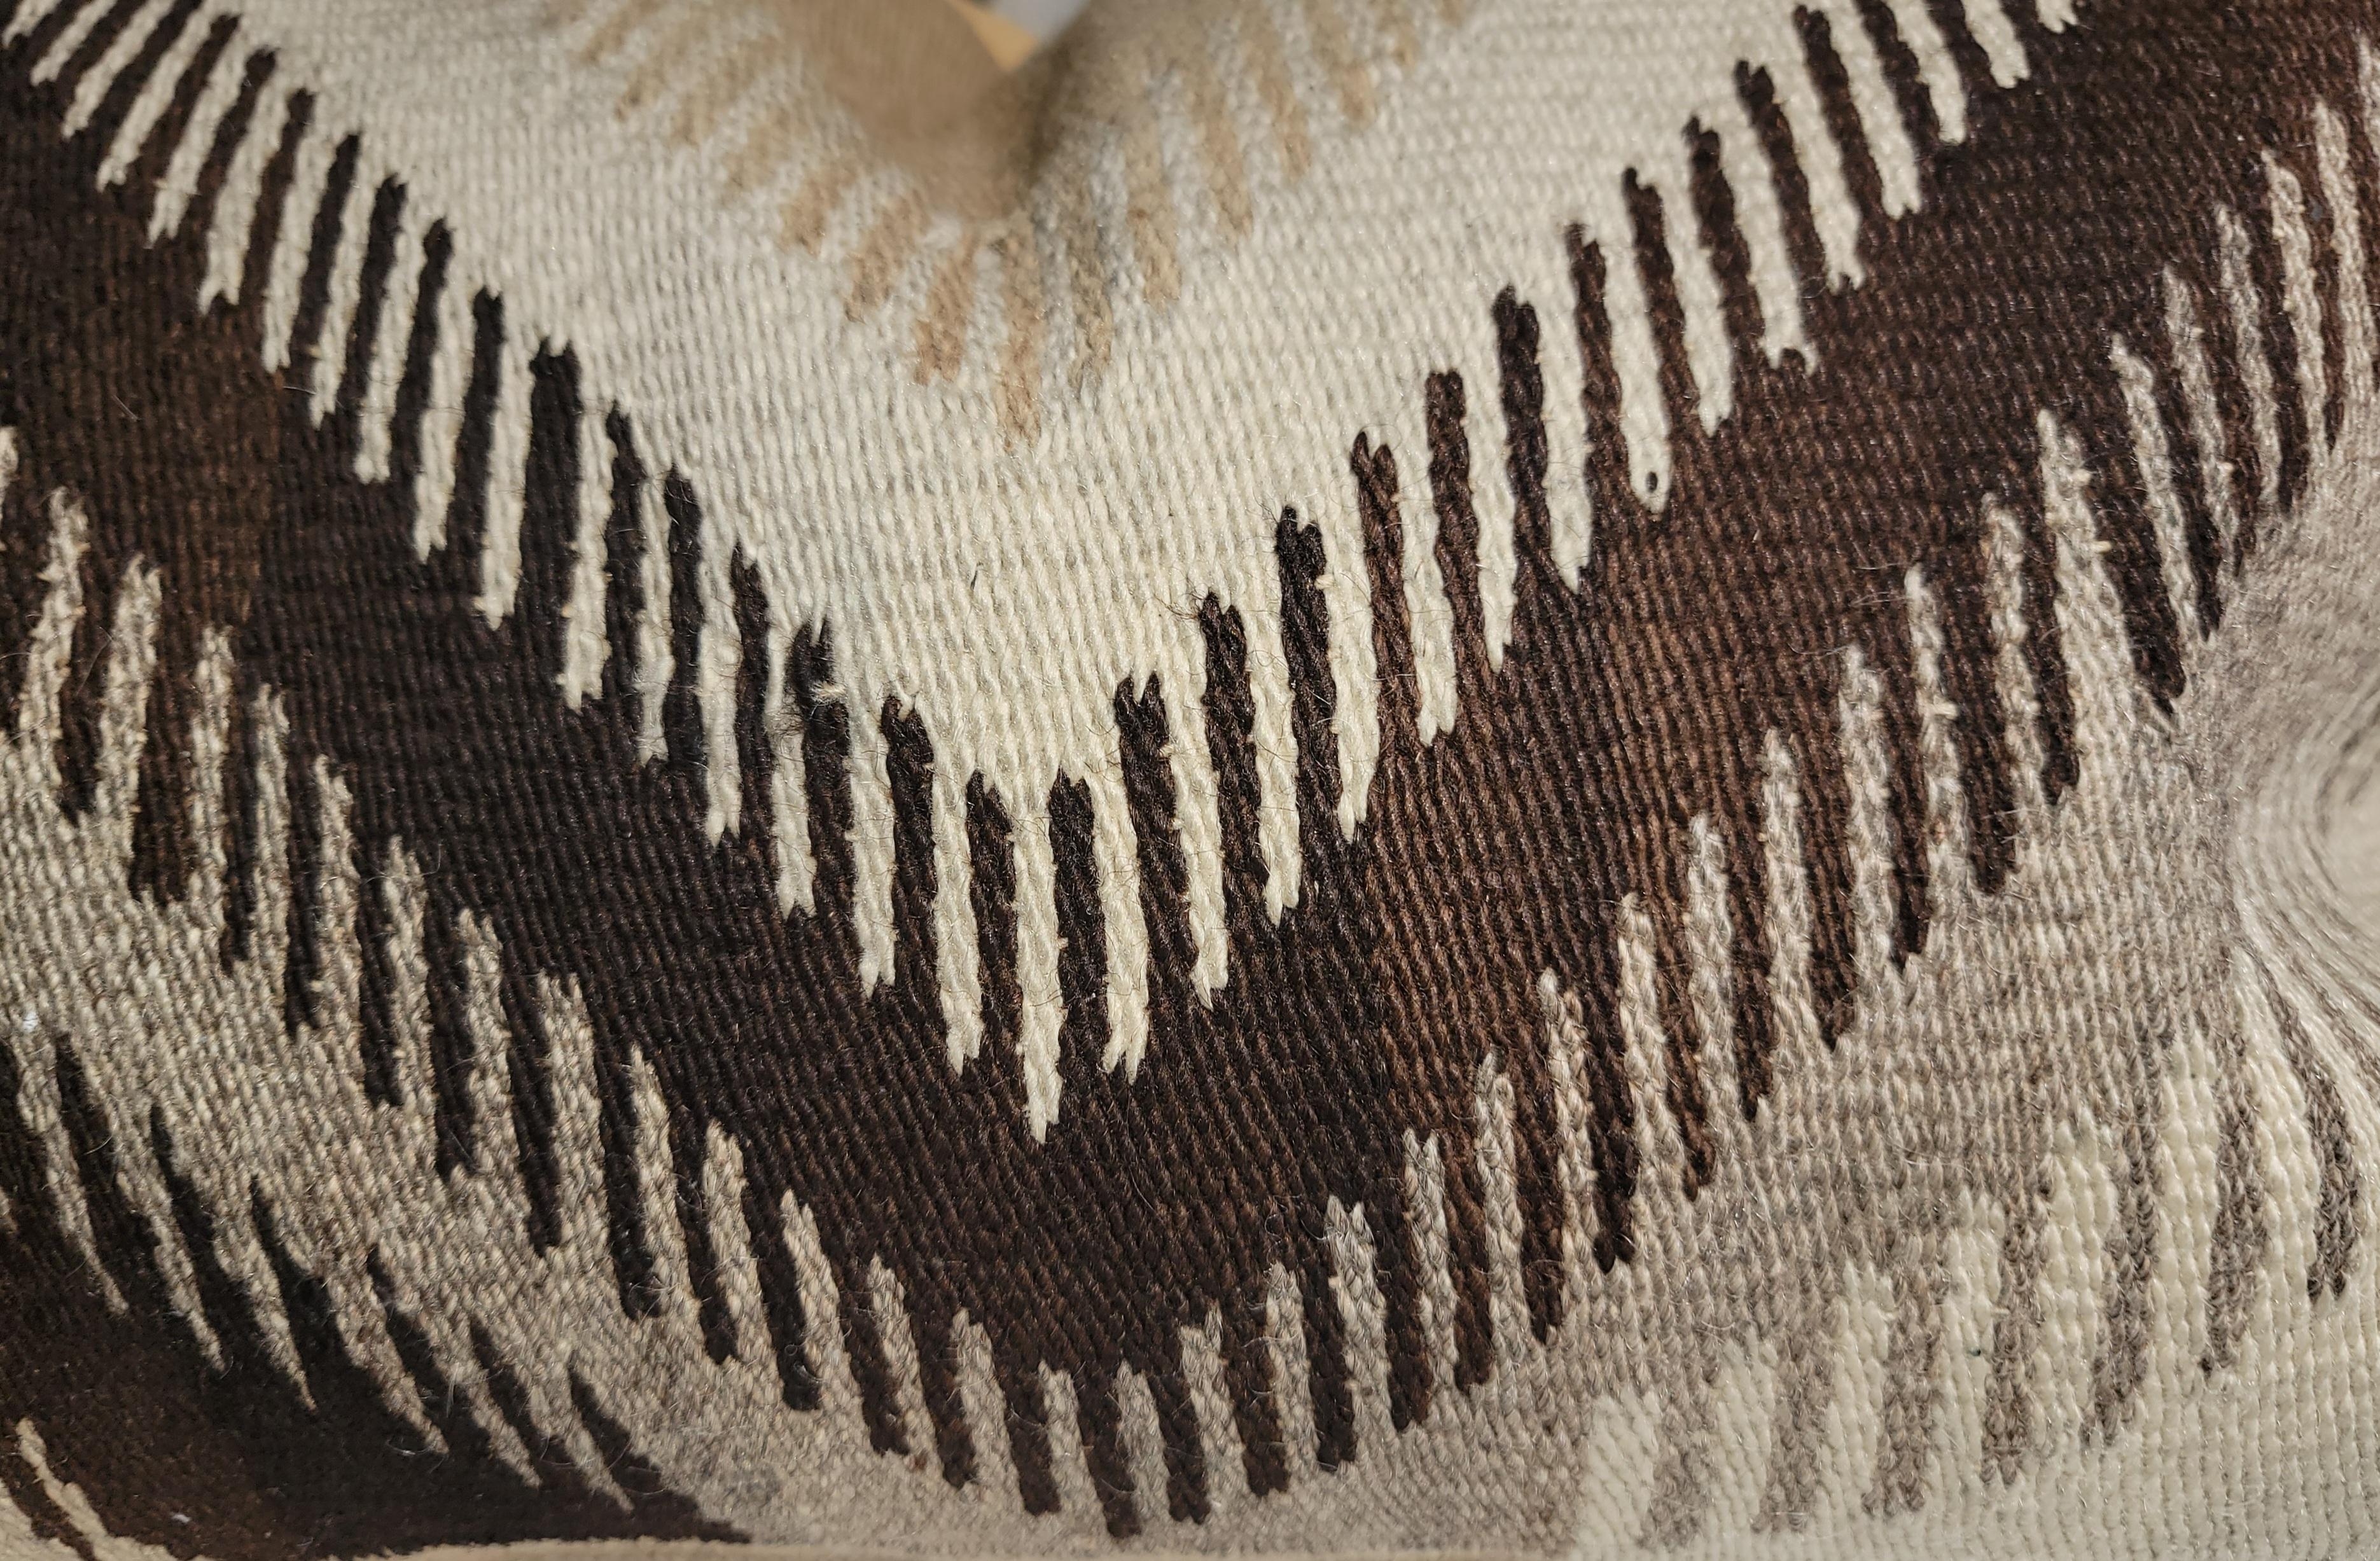 Native American natural earthy wool Stitched patterned pillow. Great neutral colors. Thick wool weave used to make the front of this pillow. The backing is a beige linen. Adds some color to the pillows setting. 